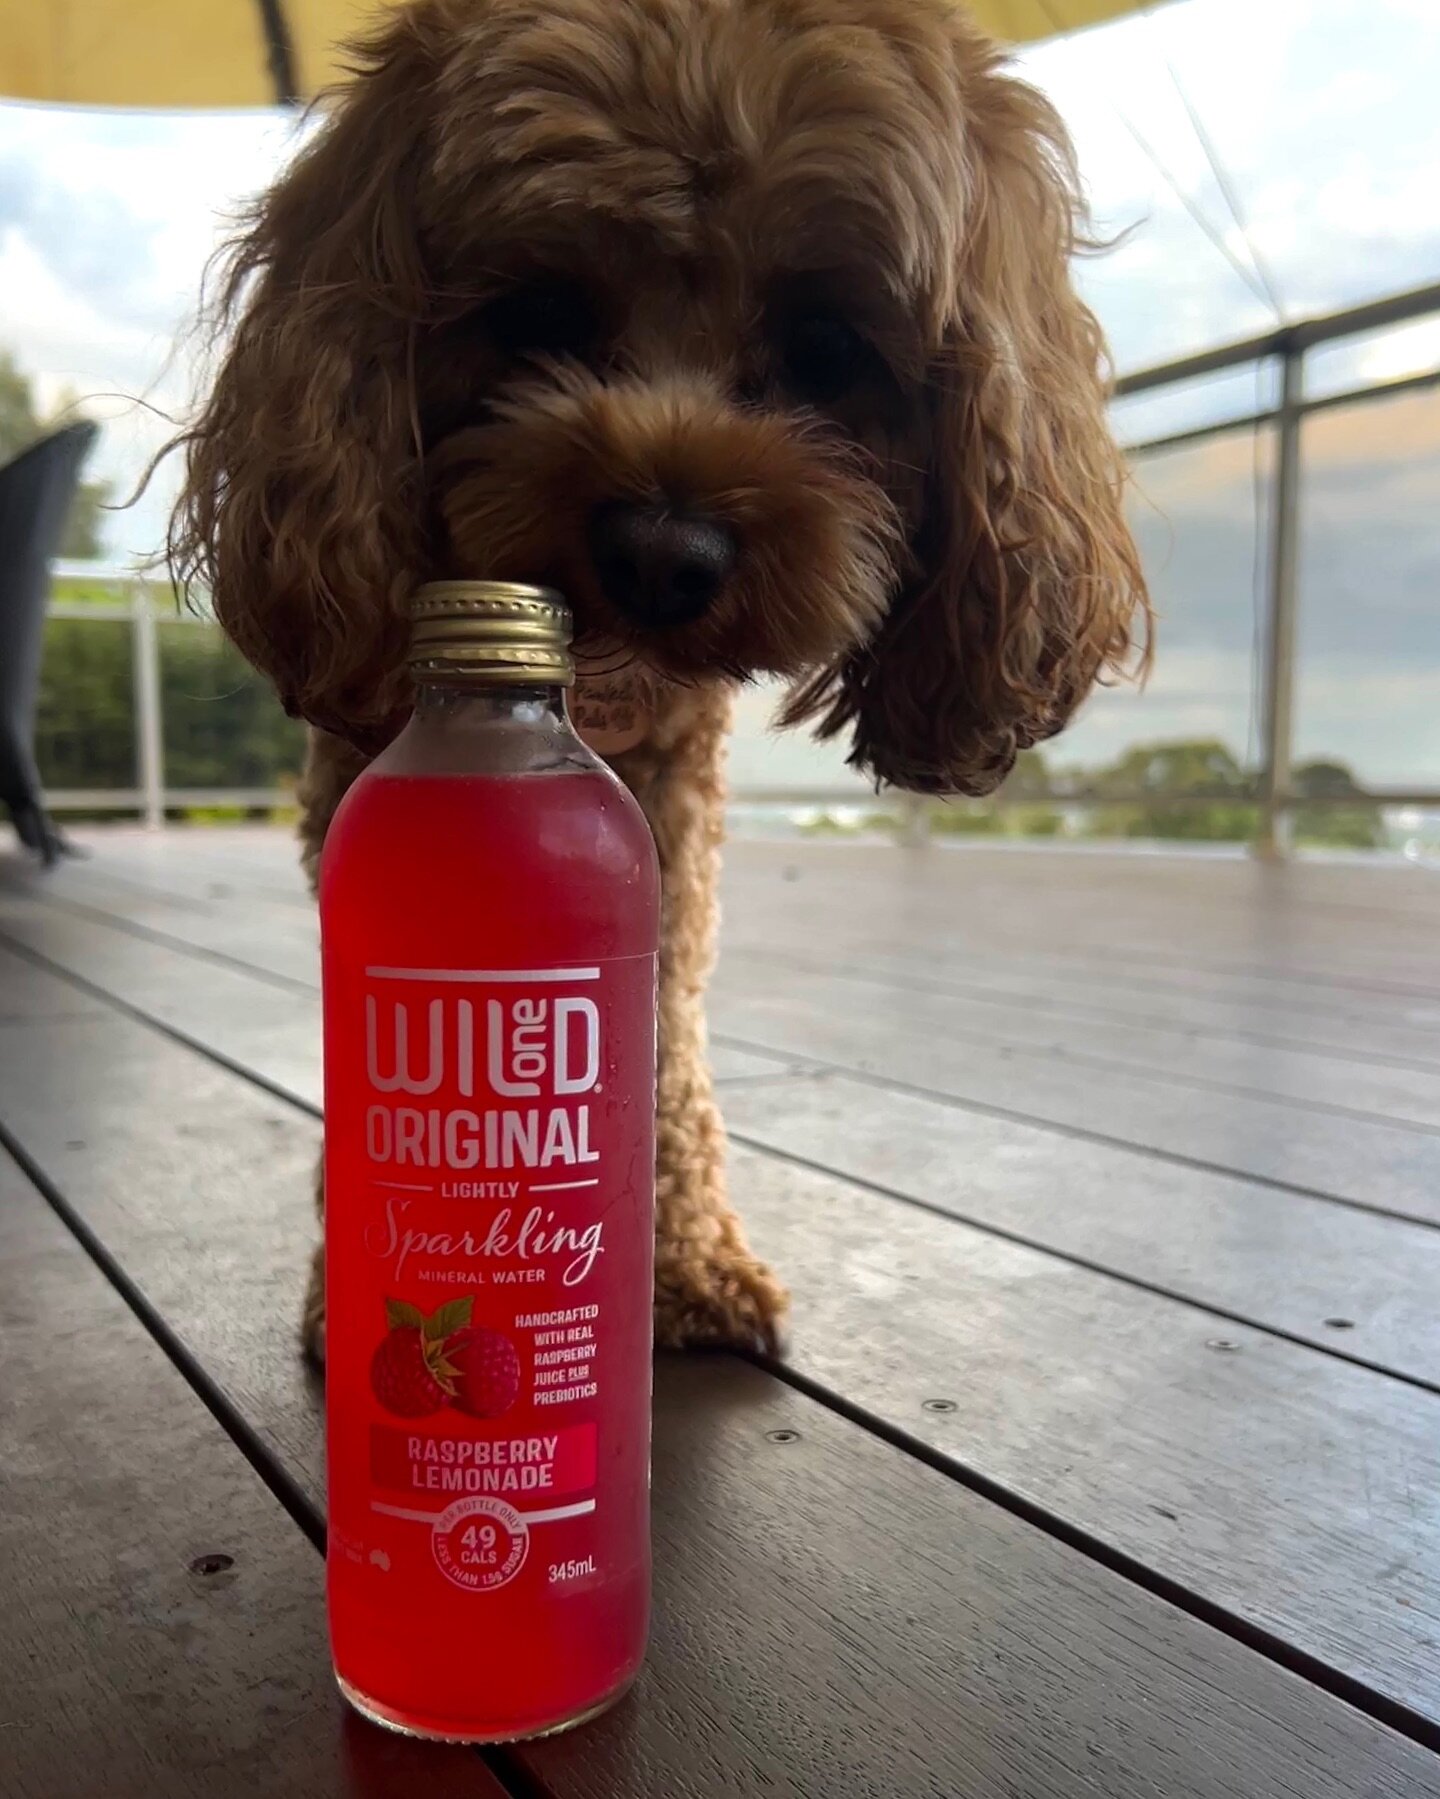 Our pup (Tommy) has chosen his favourite flavour of sparkling mineral water.. Raspberry Lemonade! Solid choice we must say. For every 🐶 in the comments we will give Tommy 1 &ldquo;who&rsquo;s a good boy&rdquo; 😜

A great weekend to all 🤩